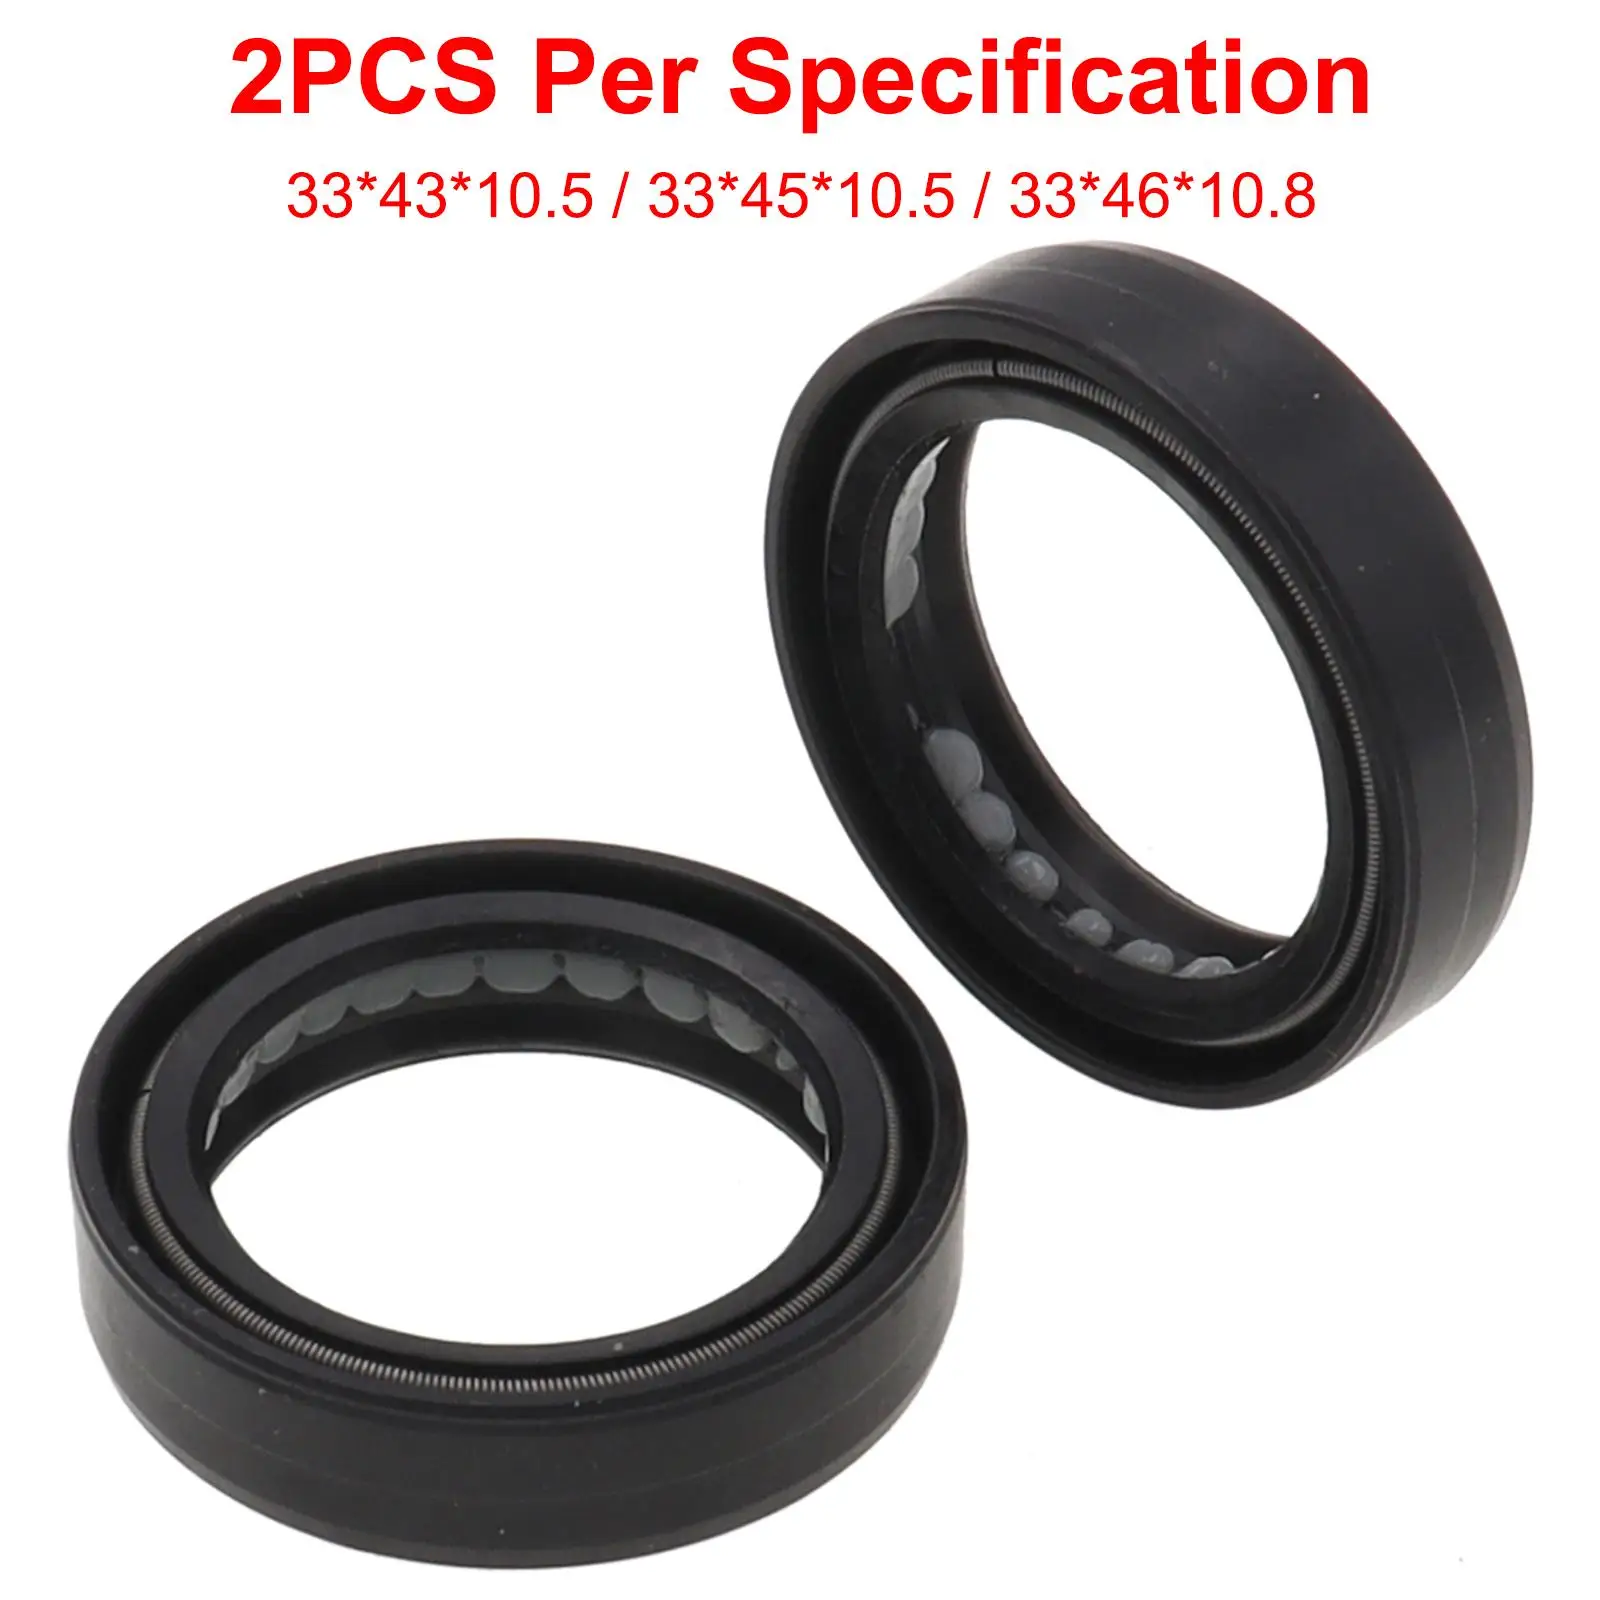 Premium Motorcycle Front Fork Damper Oil Seal High Performance Crf XR Ttr Drive Shaft Oil Seal for Motorcycle Replacement